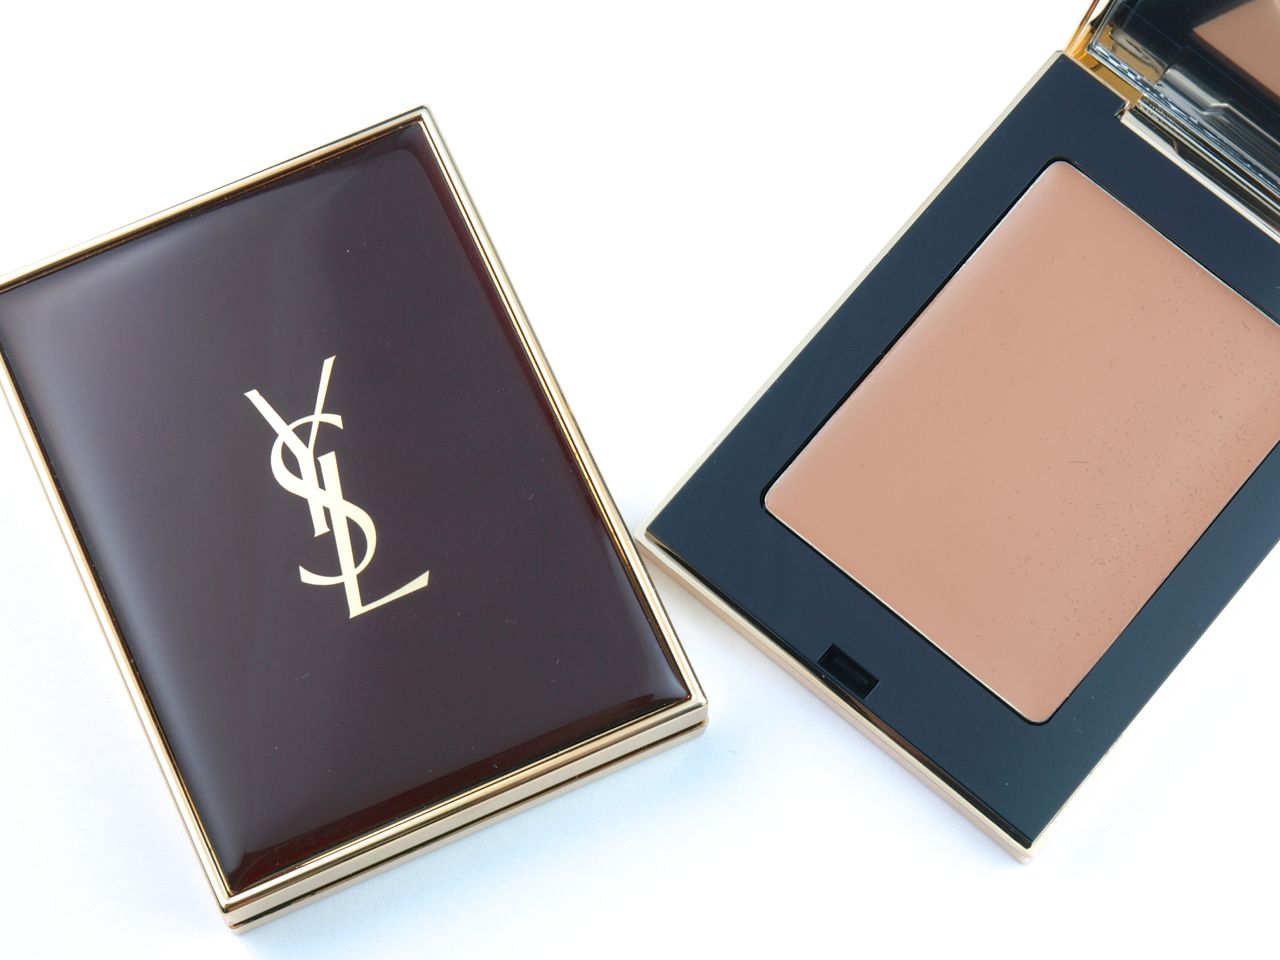 YSL Yves Saint Laurent Sun-Kissed Blur Perfector Healthy Glow Balm-Powder: Review and Swatches